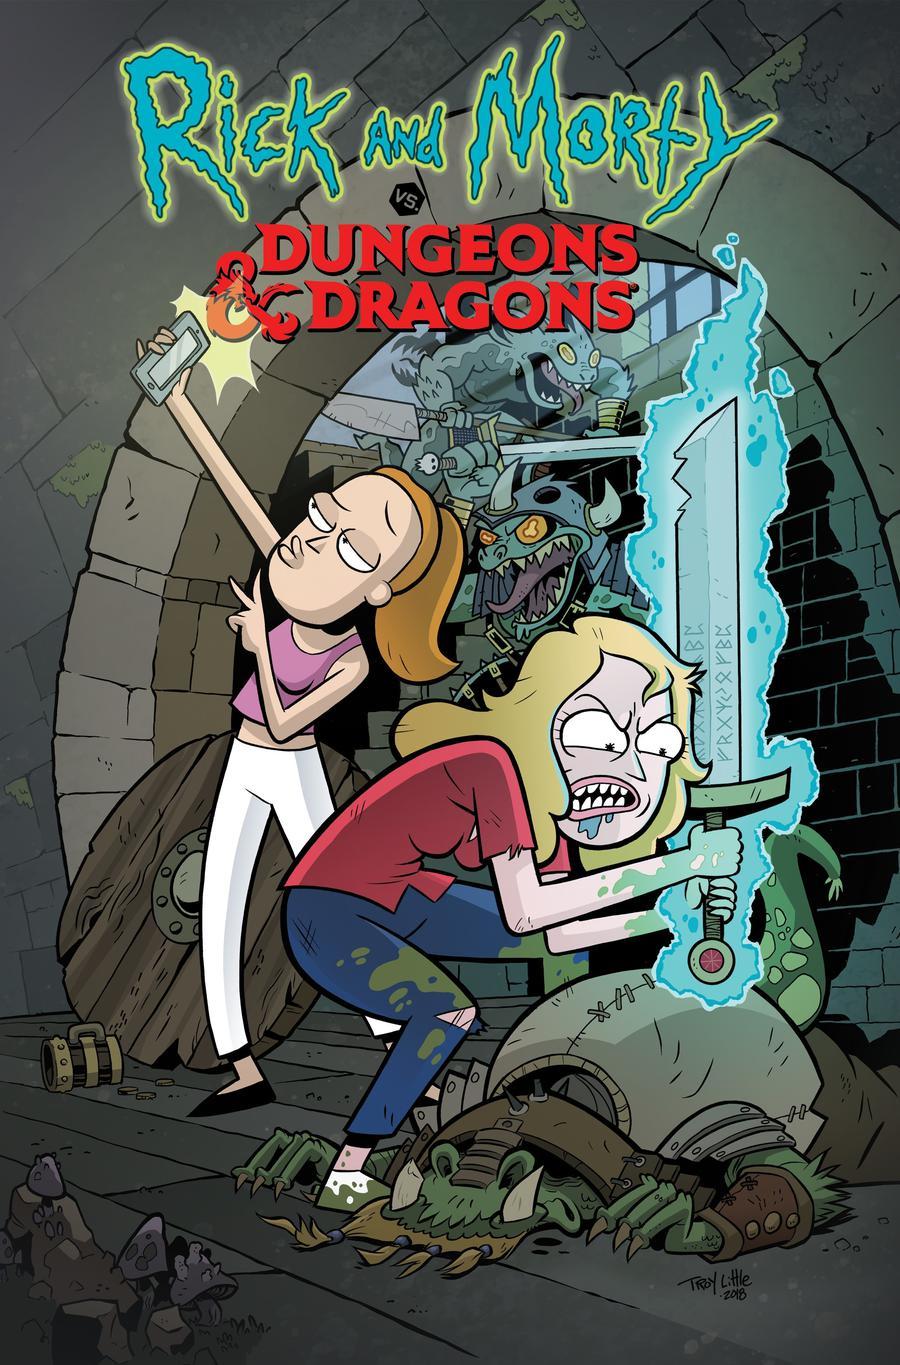 Rick And Morty vs Dungeons & Dragons Vol. 1 #2